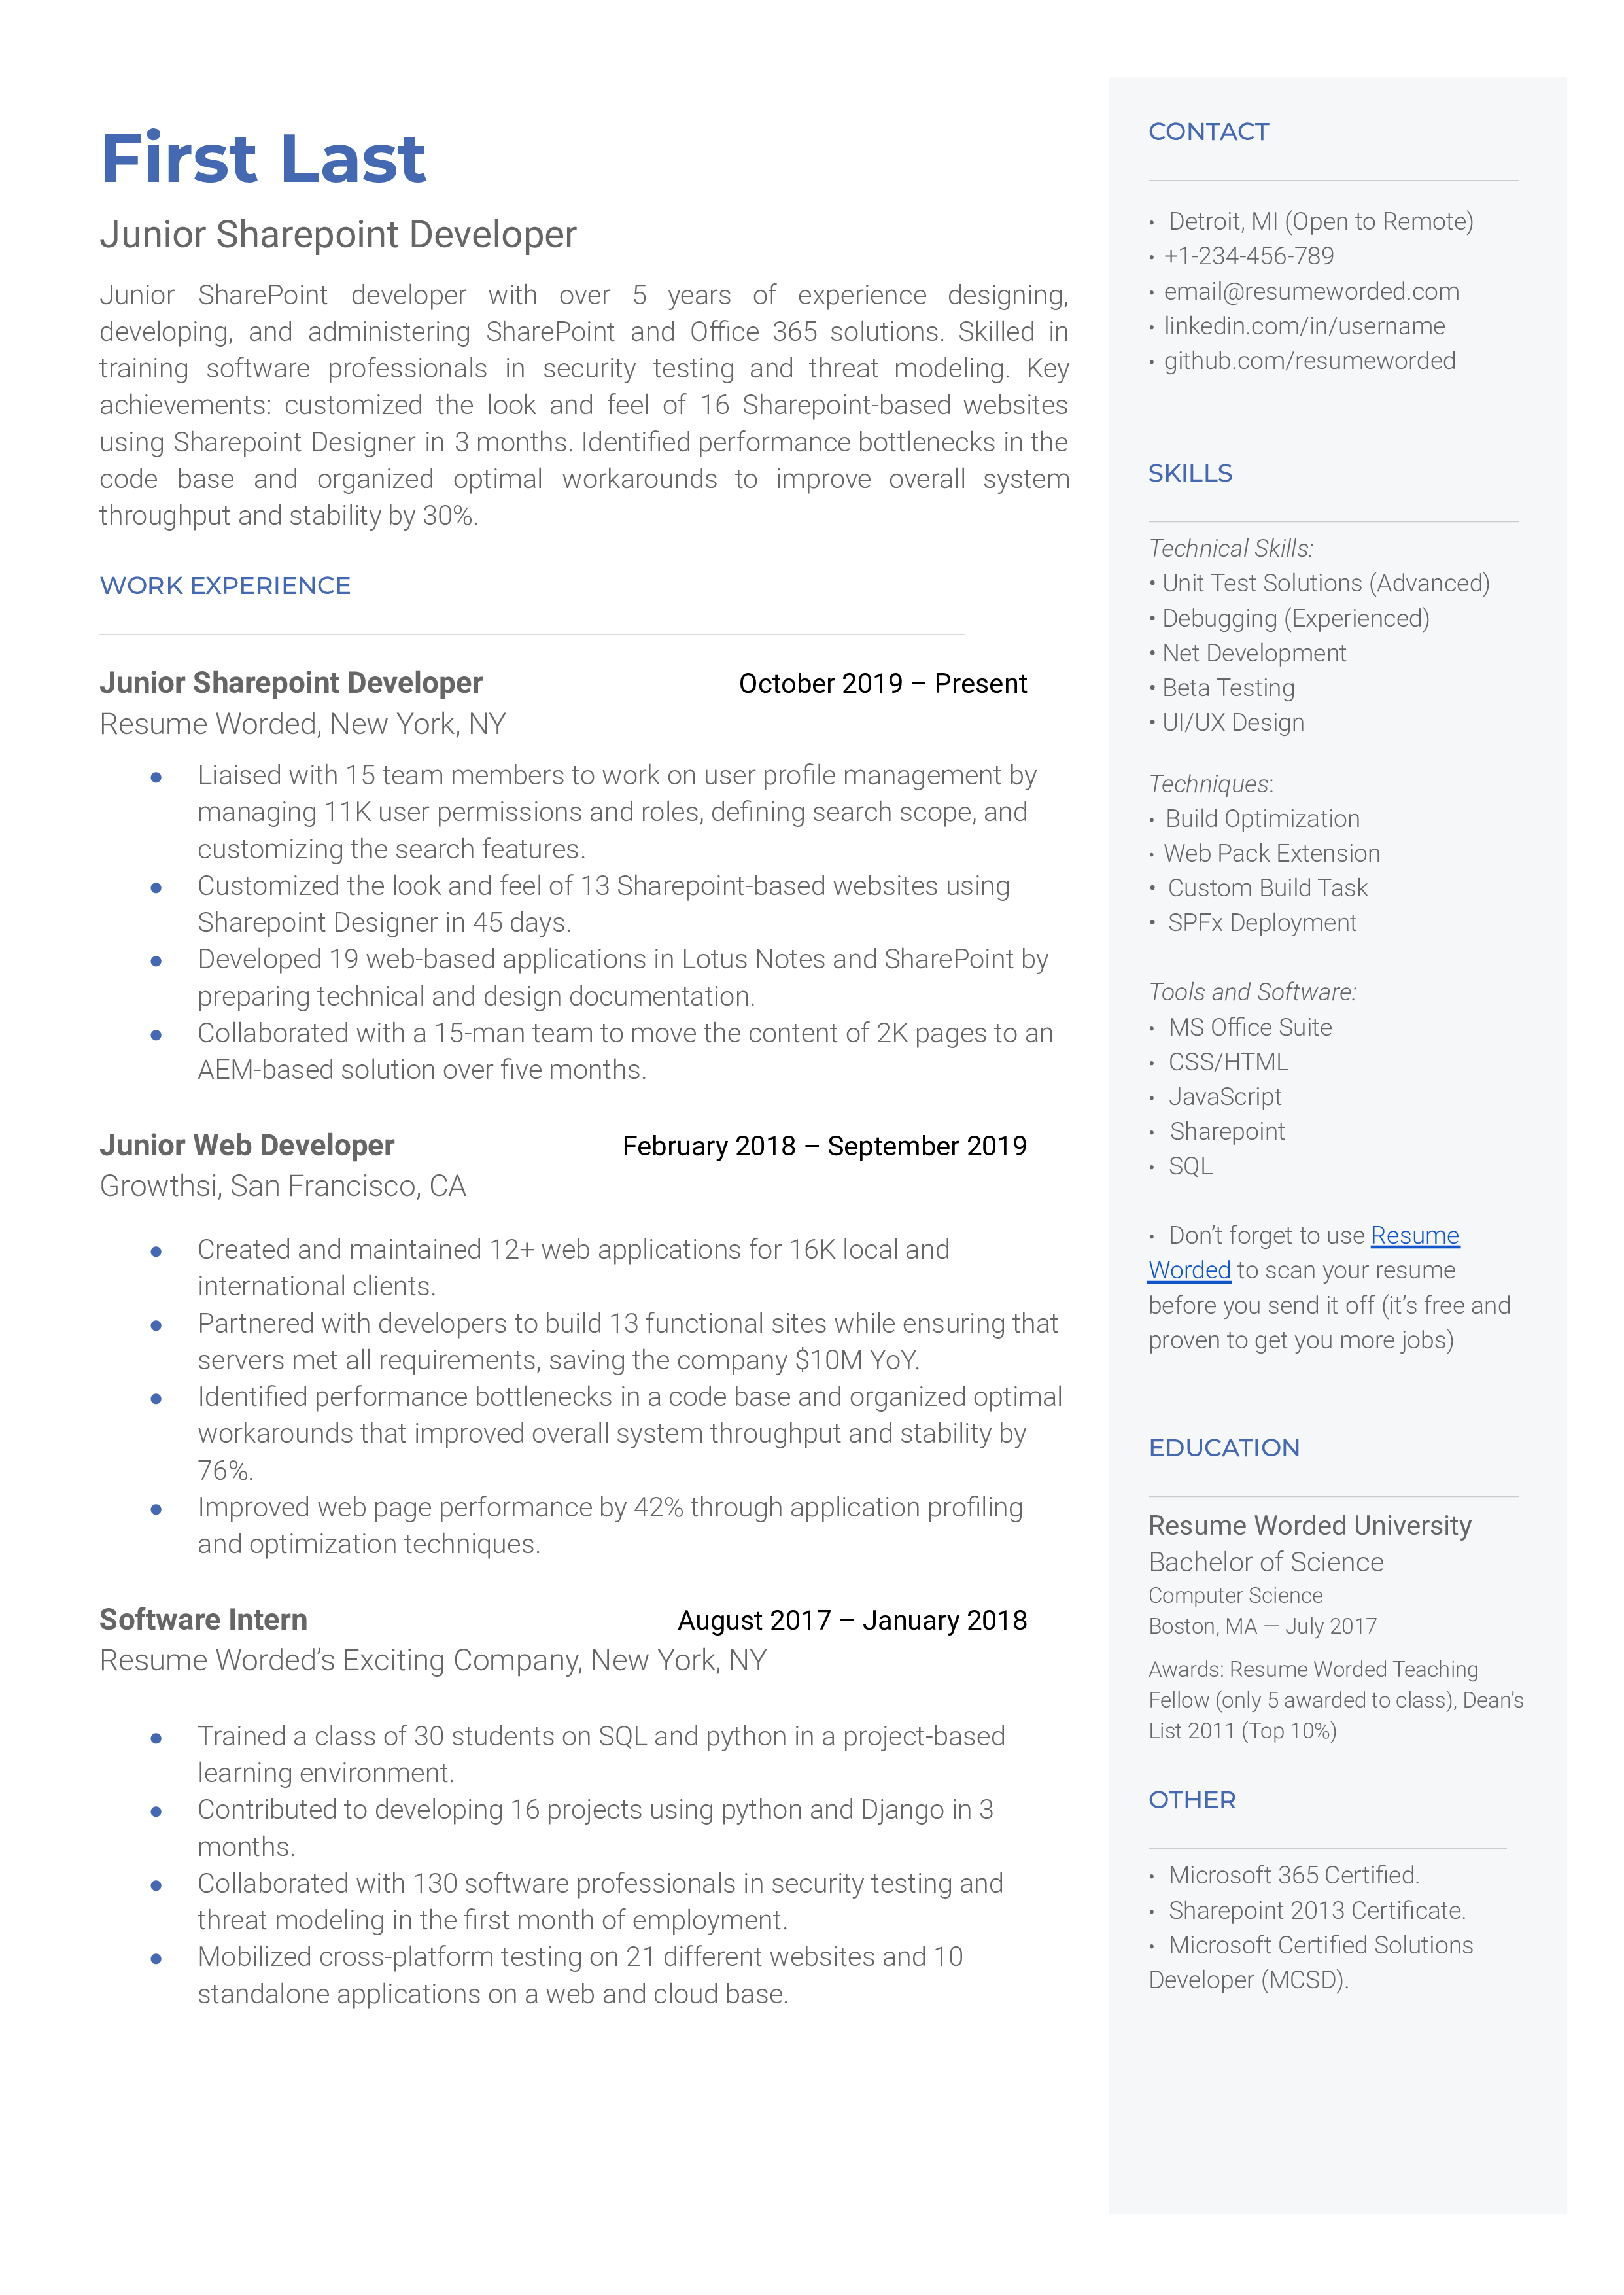 A junior SharePoint developer resume template that includes metrics to highlight achievements